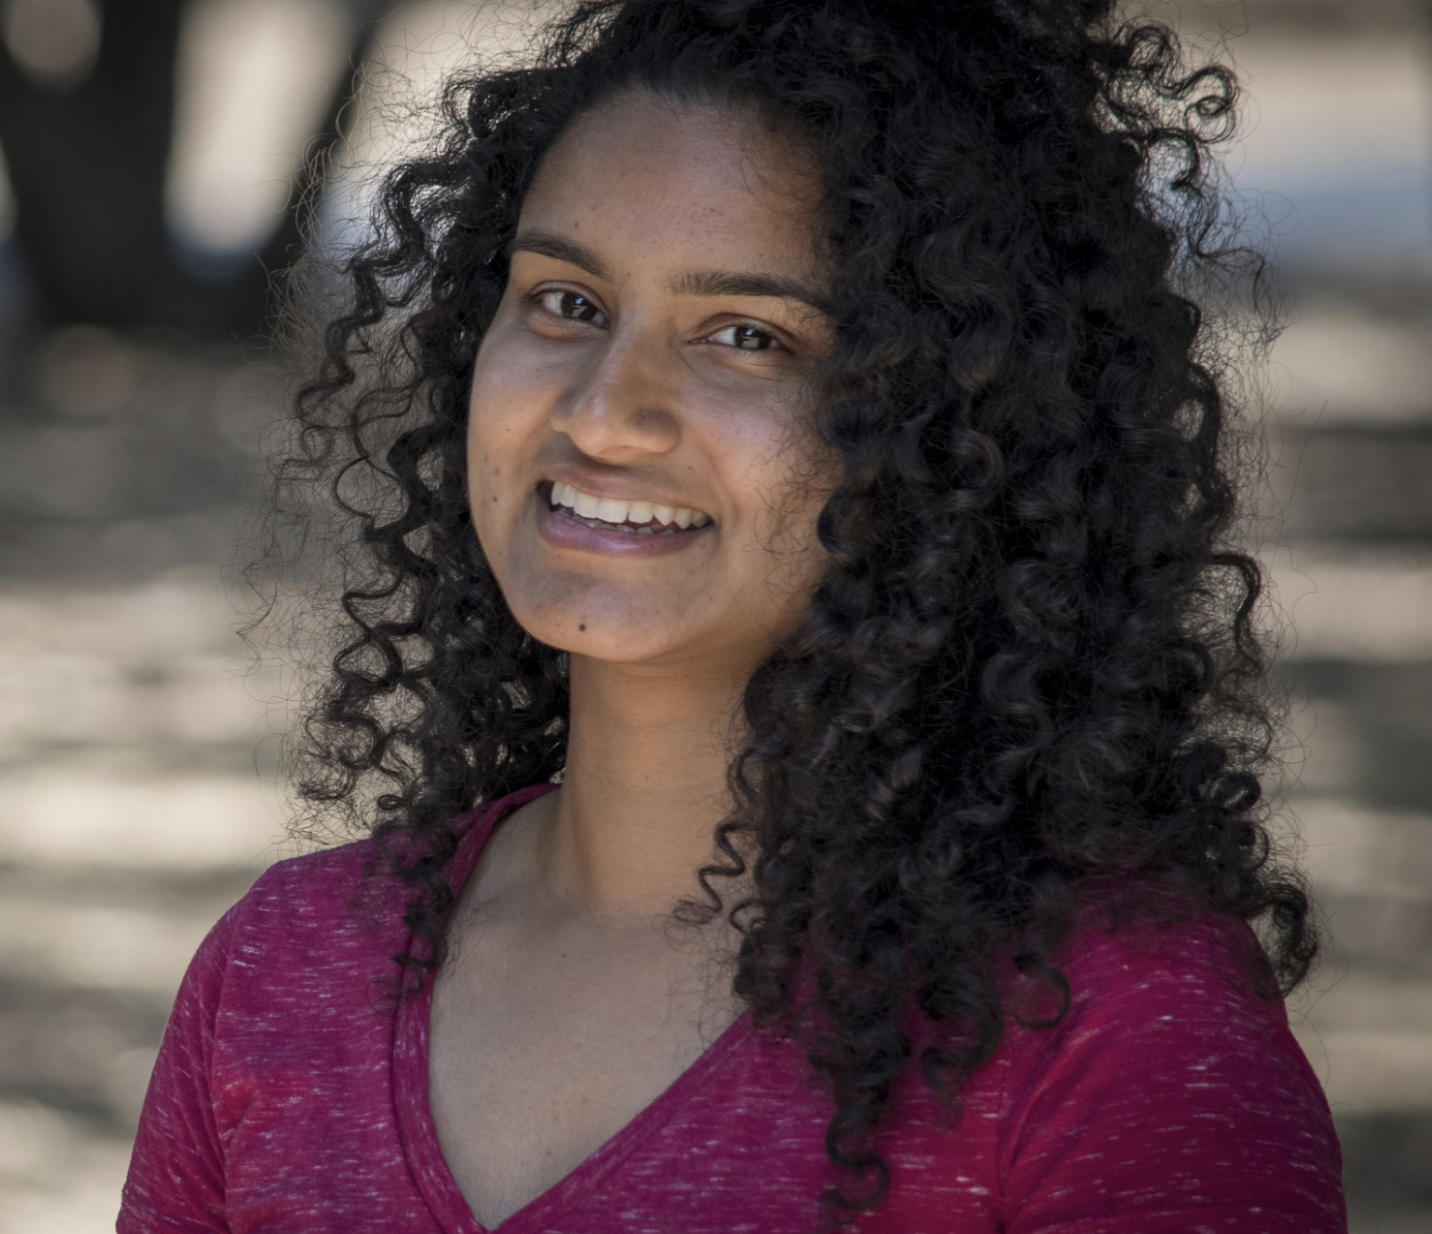  “Hey, I’m Samy! I’m an Environment and Resources PhD graduate from Stanford University. I see high schoolers deal with the same challenges I had and appreciate the opportunity to give them the support I wished I had been given.”   